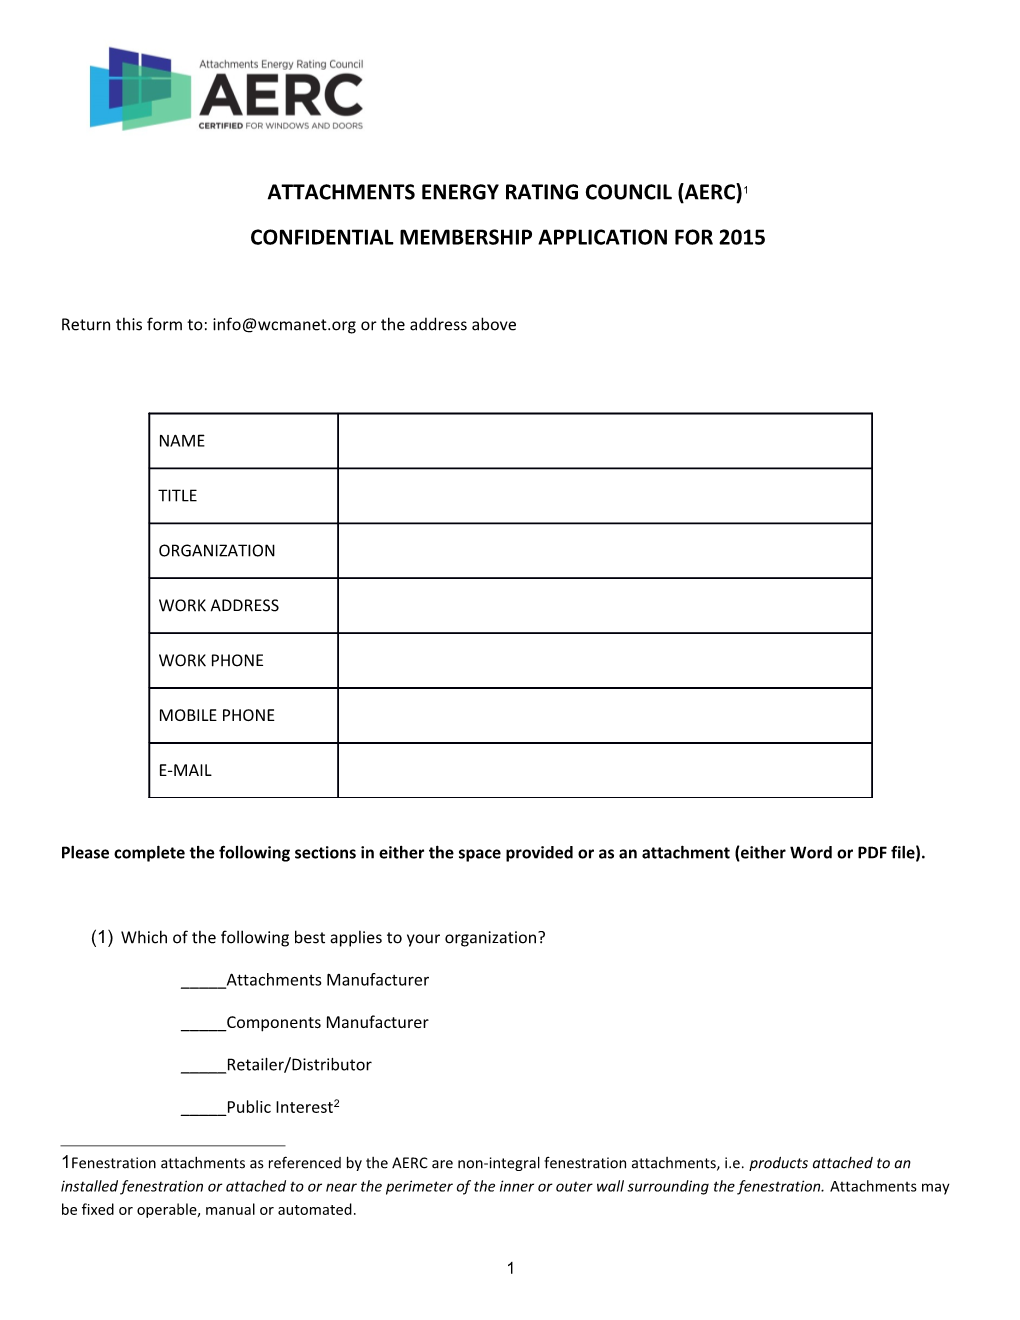 Confidential Membership Application for 2015